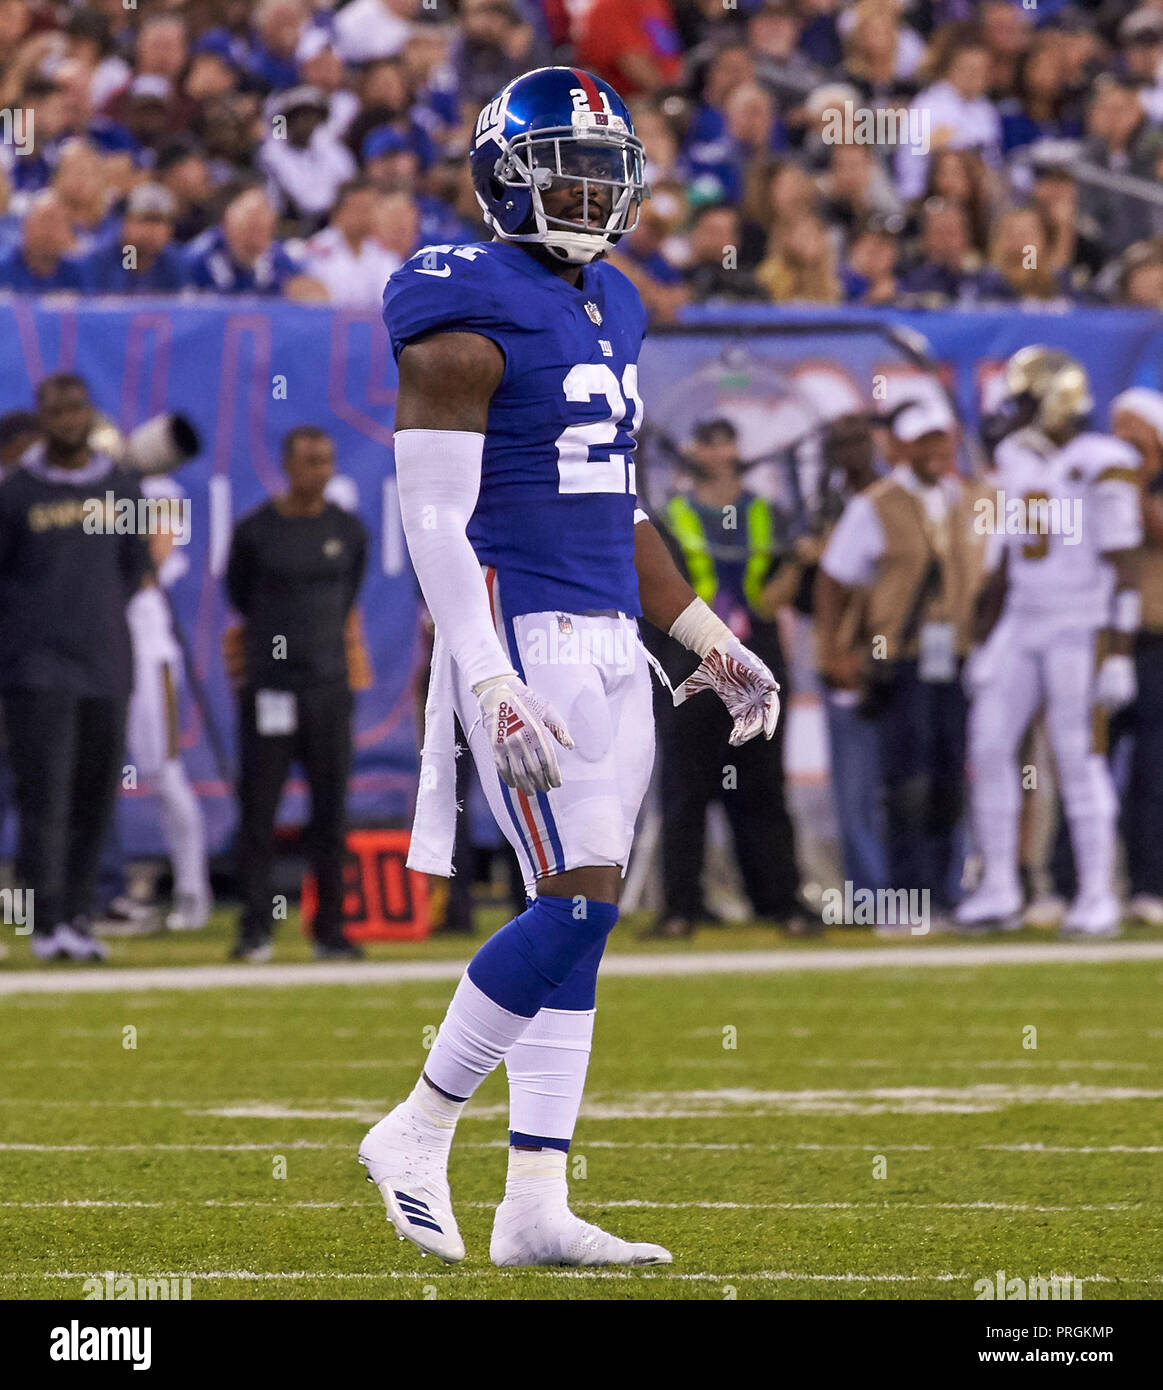 October 2, 2018 - East Rutherford, New Jersey, U.S. - New York Giants  defensive back Landon Collins (21) in the second half during a NFL game  between the New Orlean Saints and